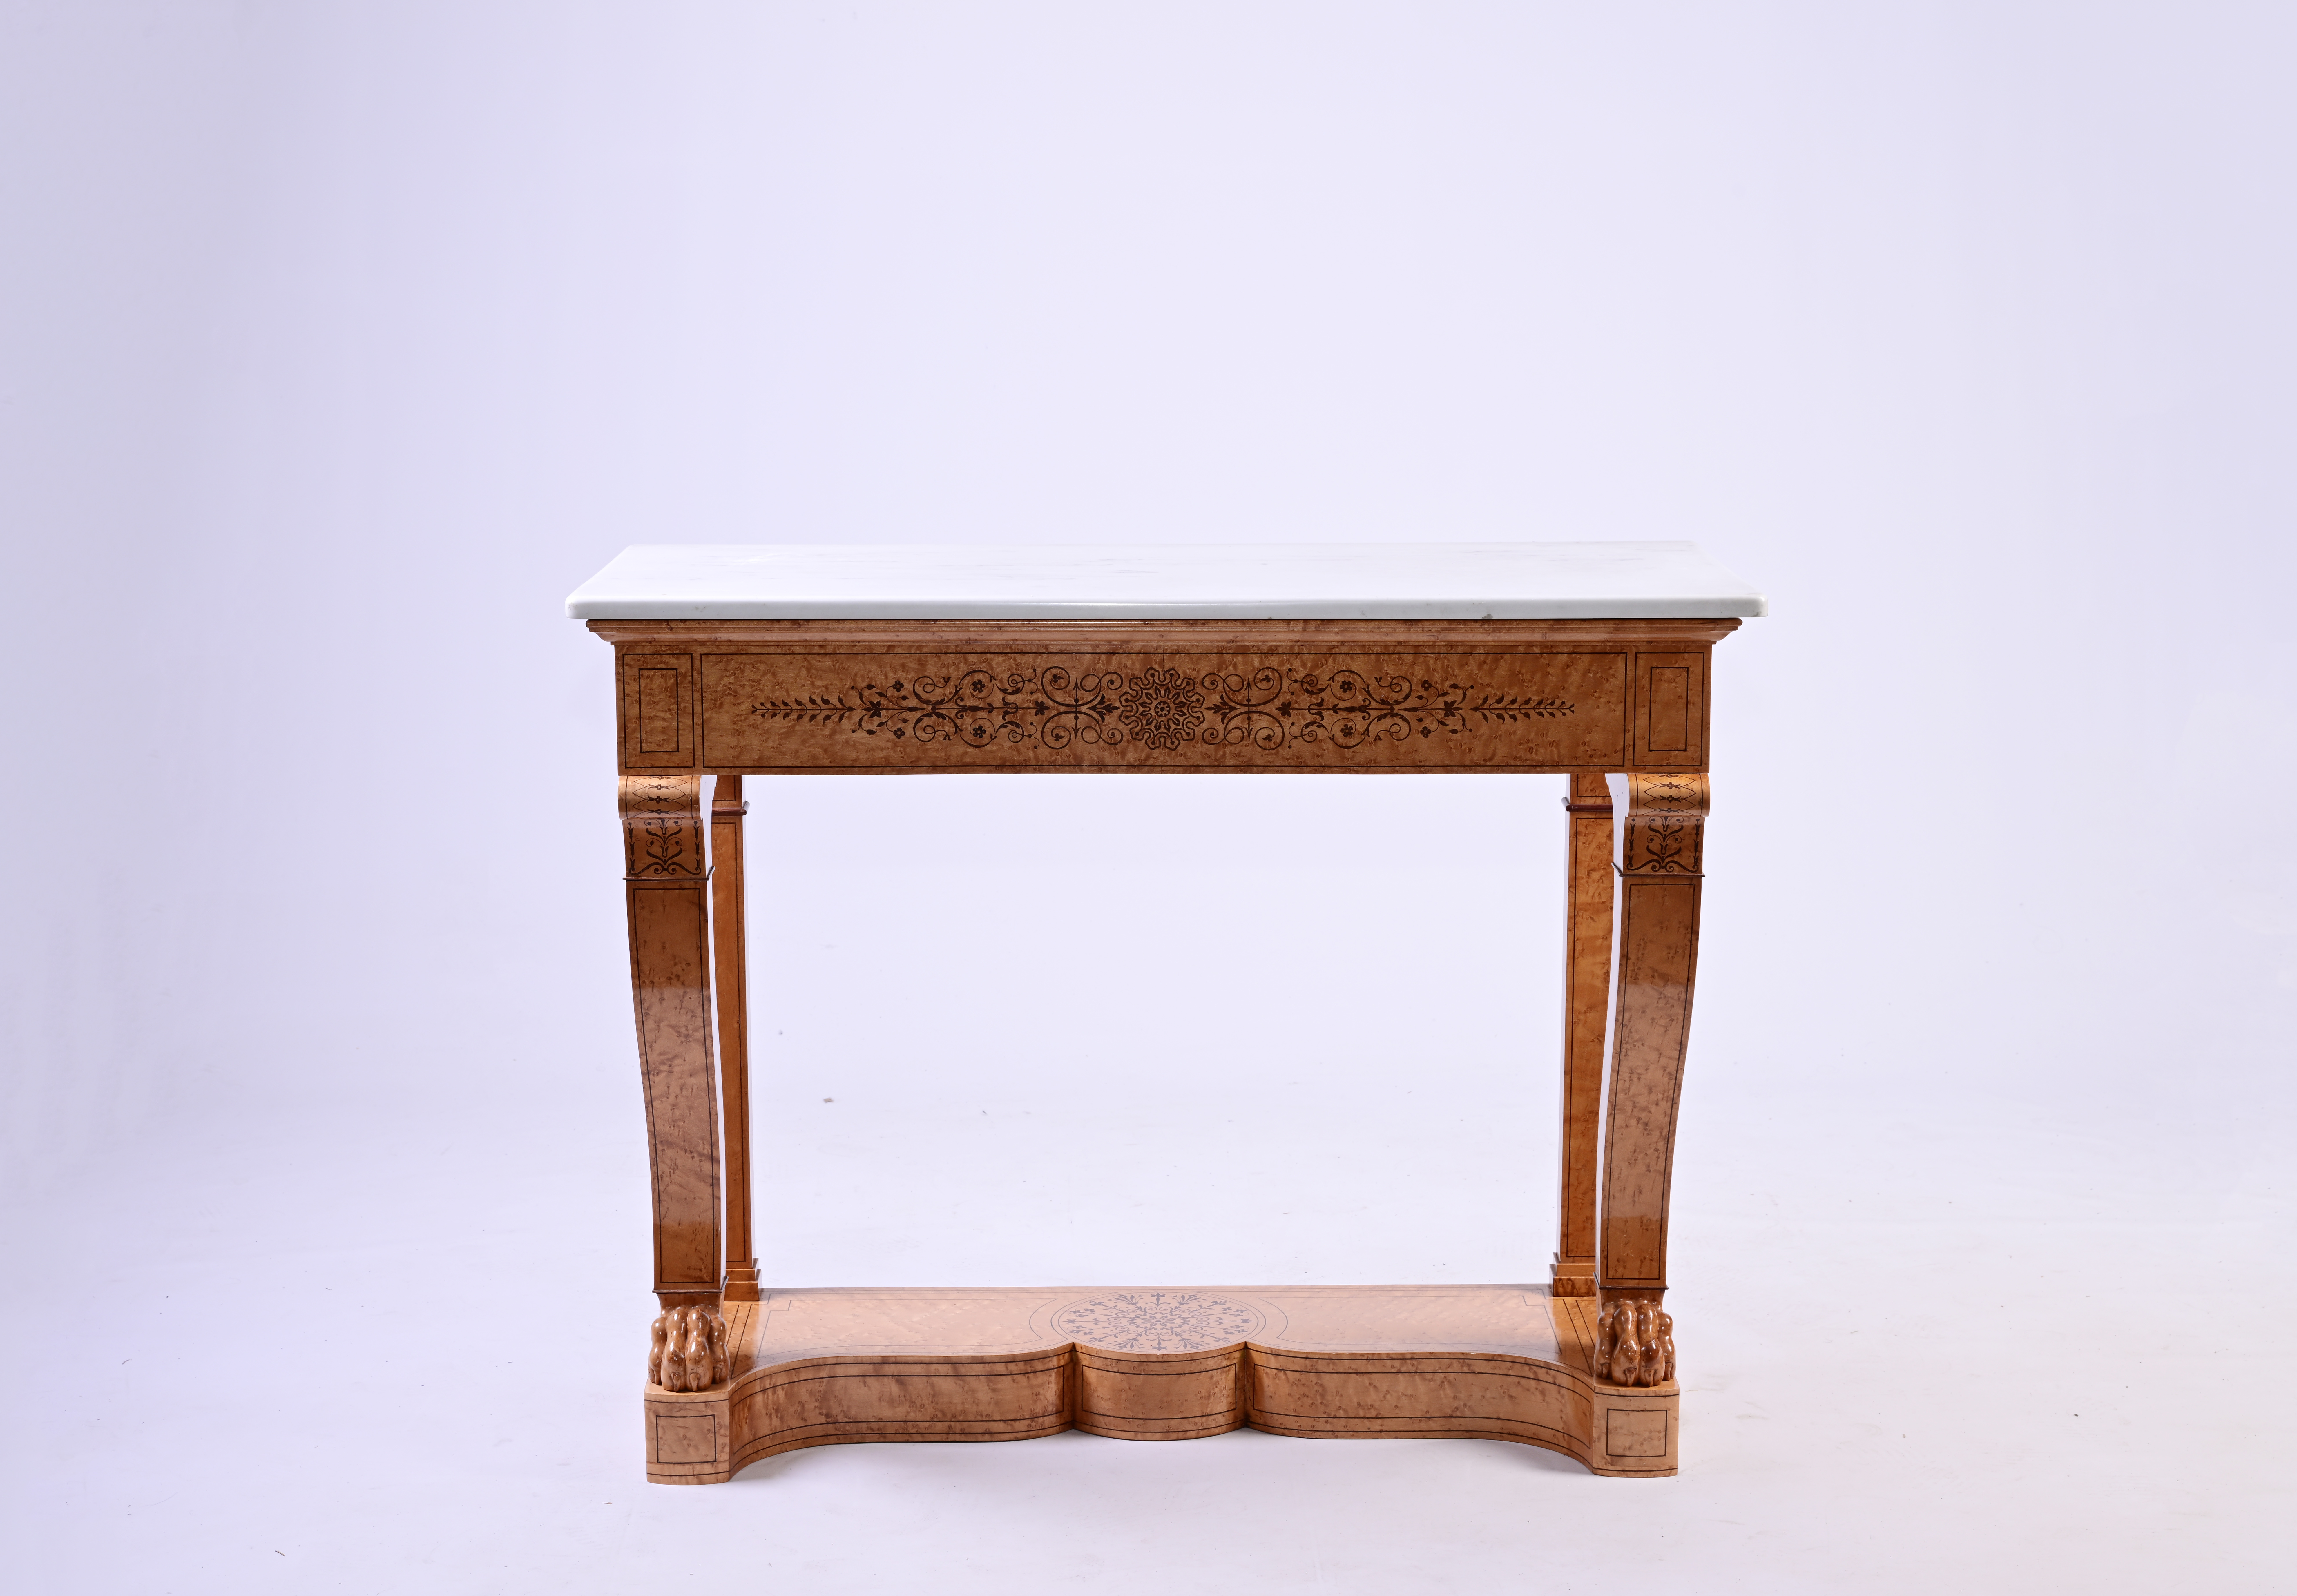 A pair of burl wood veneered Biedermeier style wall consoles with inlay and marble top, 19th/20th C. - Image 8 of 9